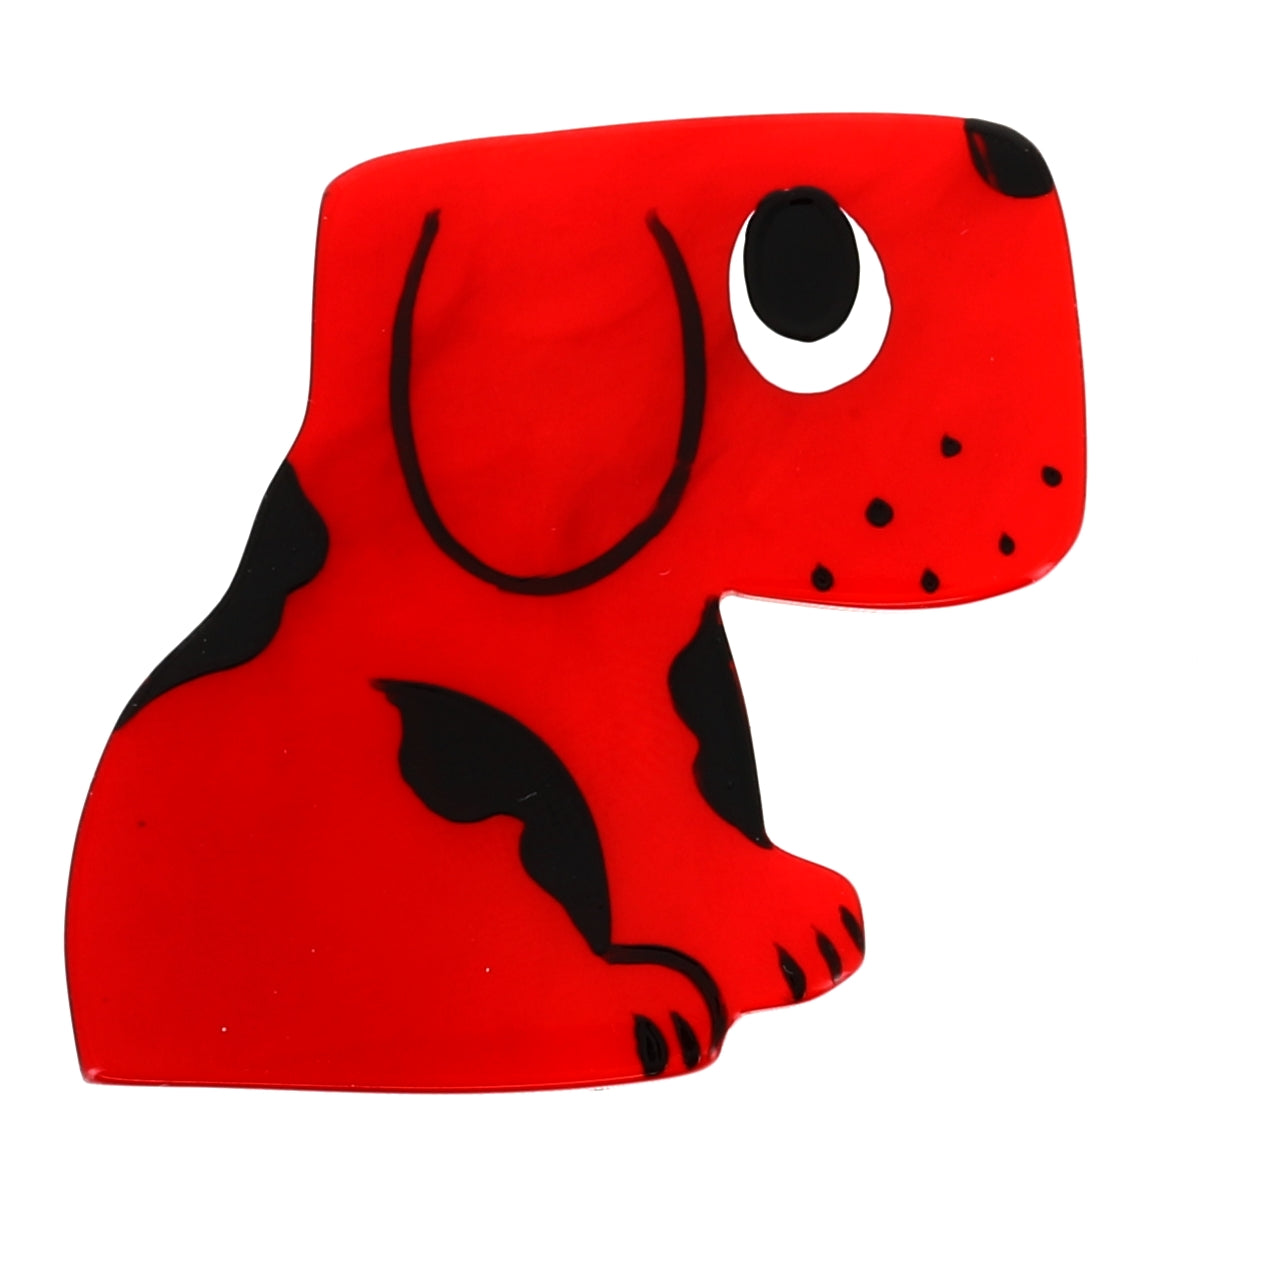 Round Red Dog Brooch (Profil) in galalith